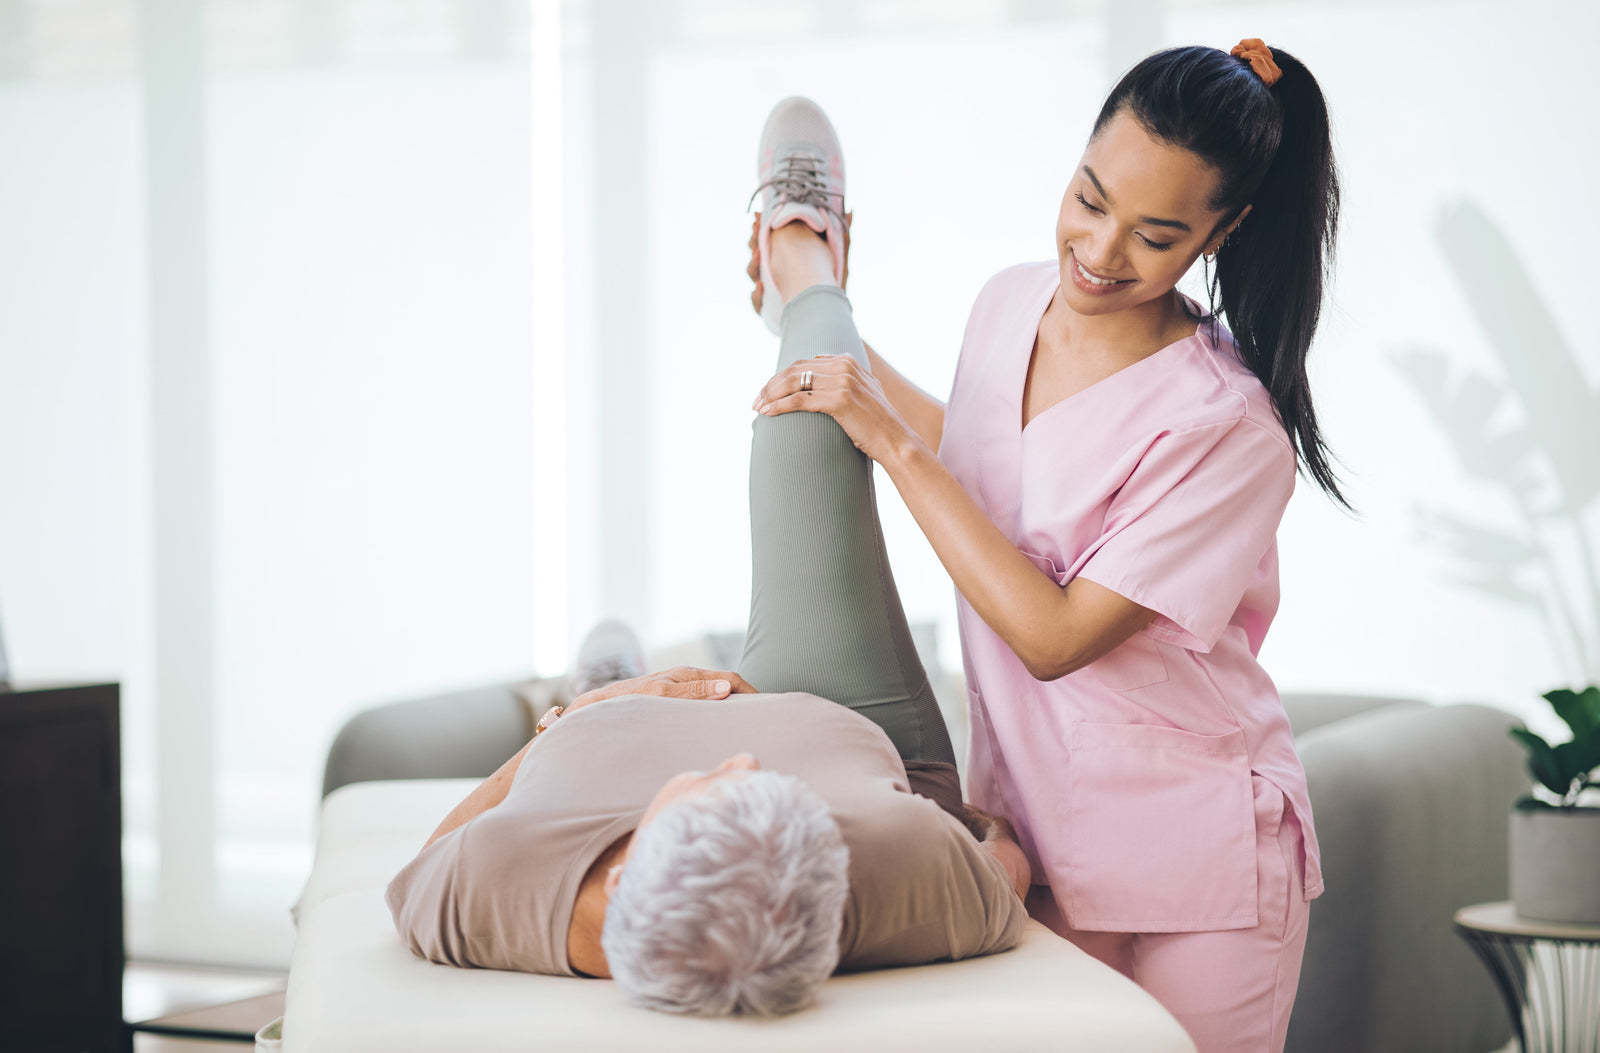 A physical therapist helping an older adult female stretch her leg on a massage table